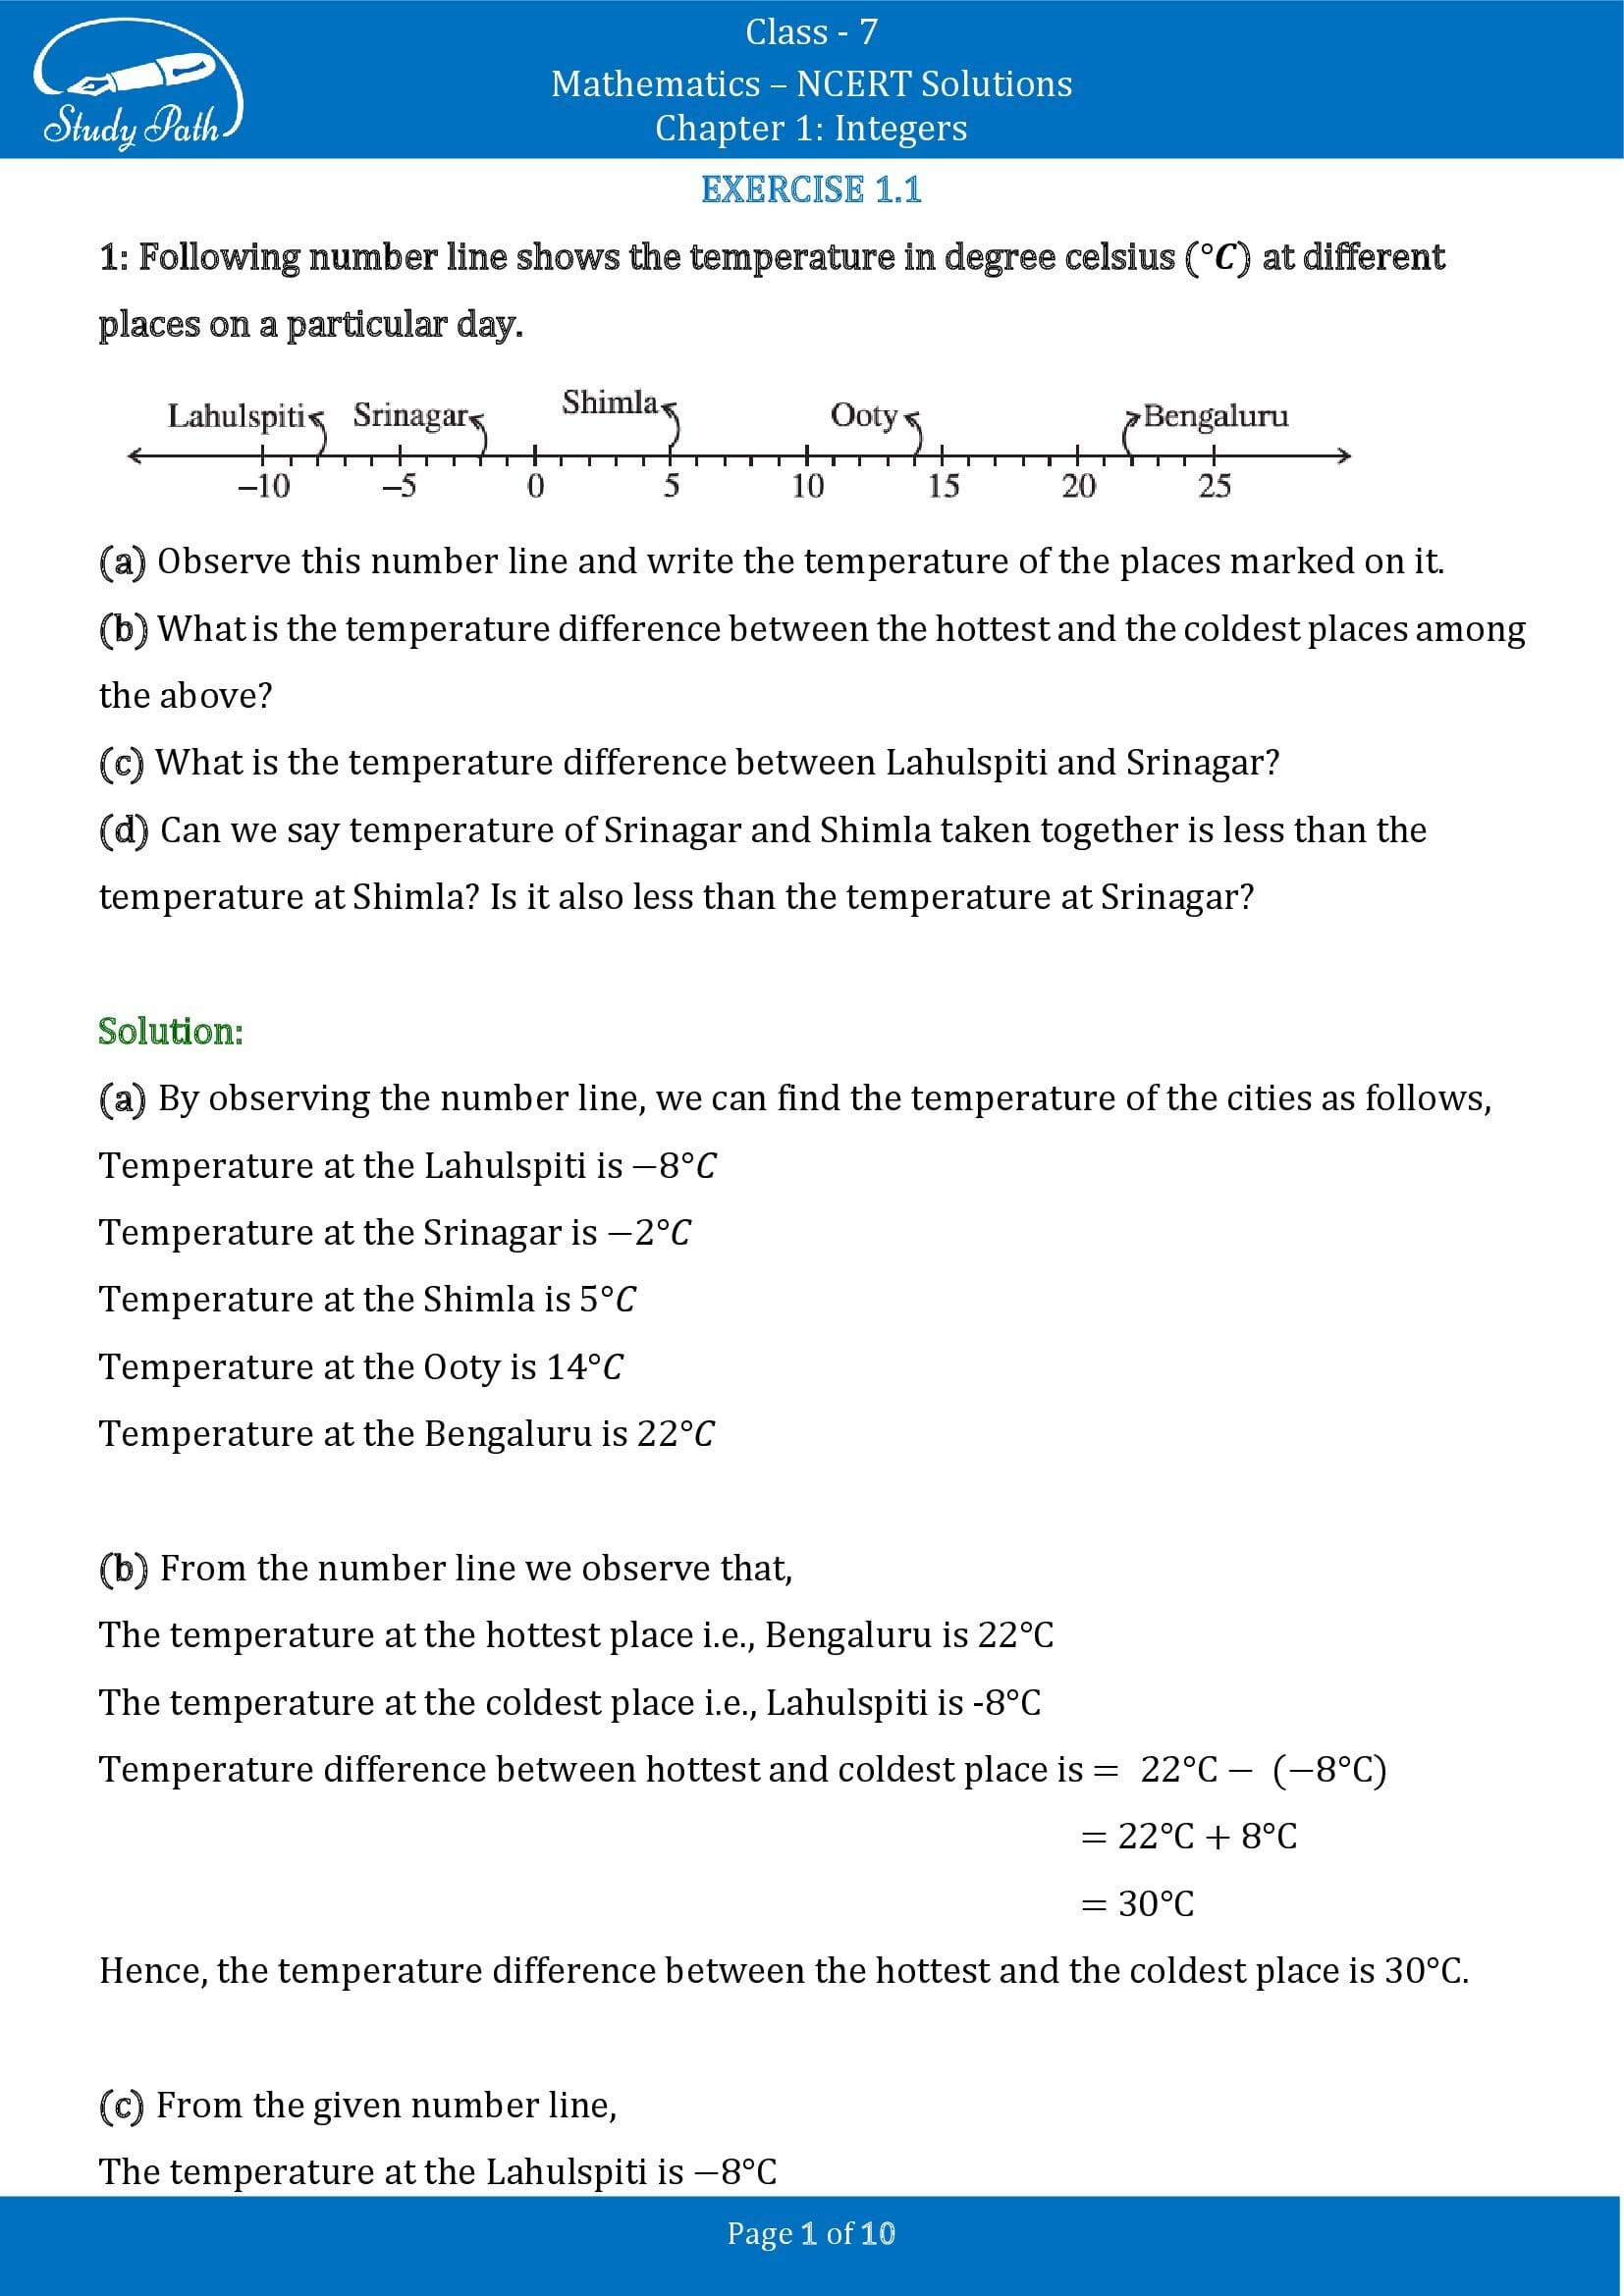 NCERT Solutions for Class 7 Maths Chapter 1 Integers Exercise 1.1 00001